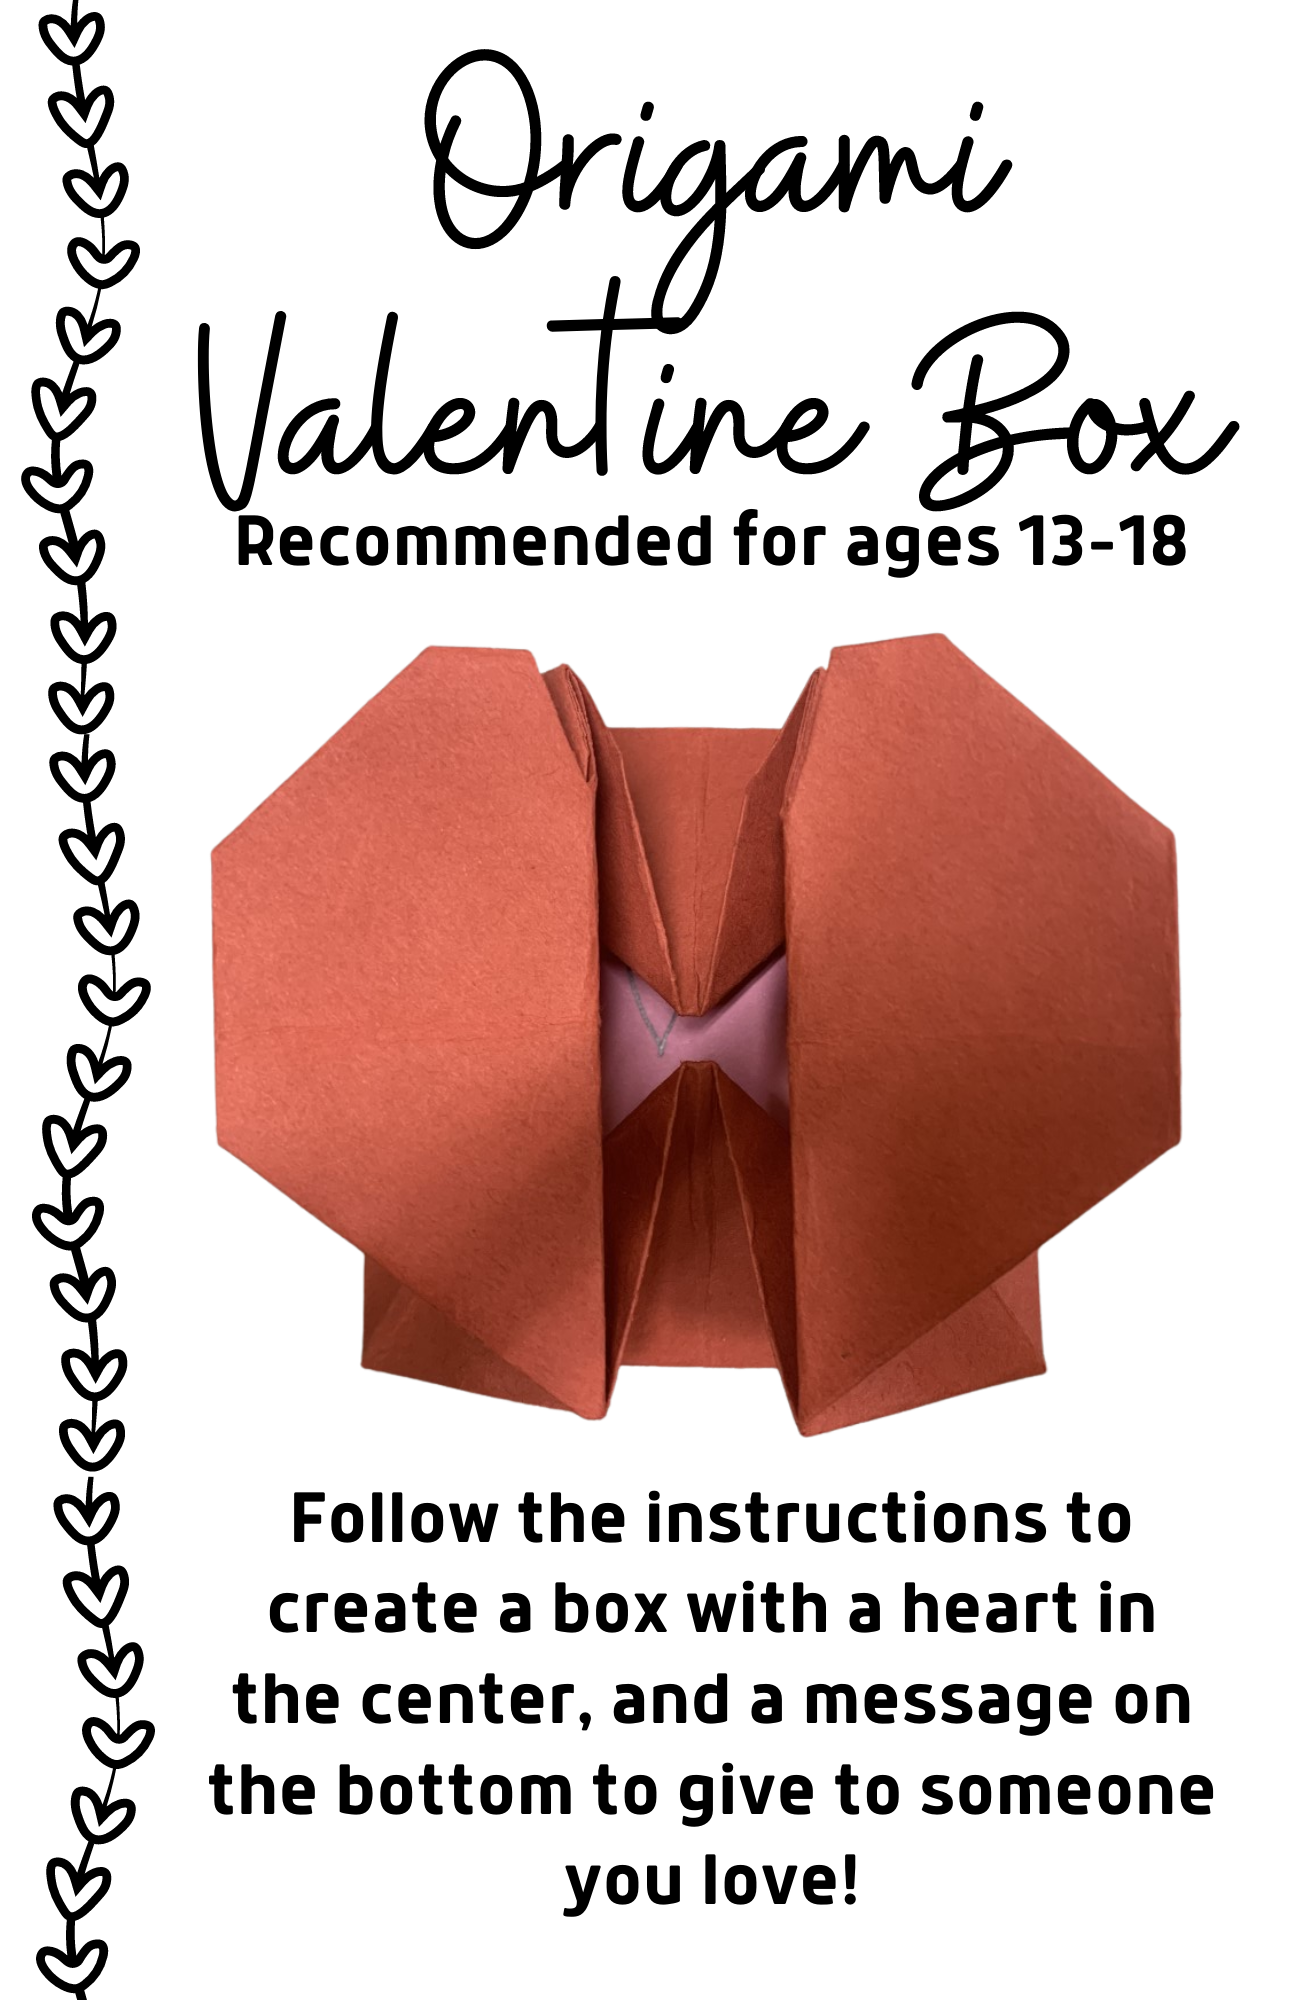 Pictured: Oragami Valentine Box and the words "Follow the instructions to create a box with a heart in the center, and a message on the bottom to give to someone you love!"